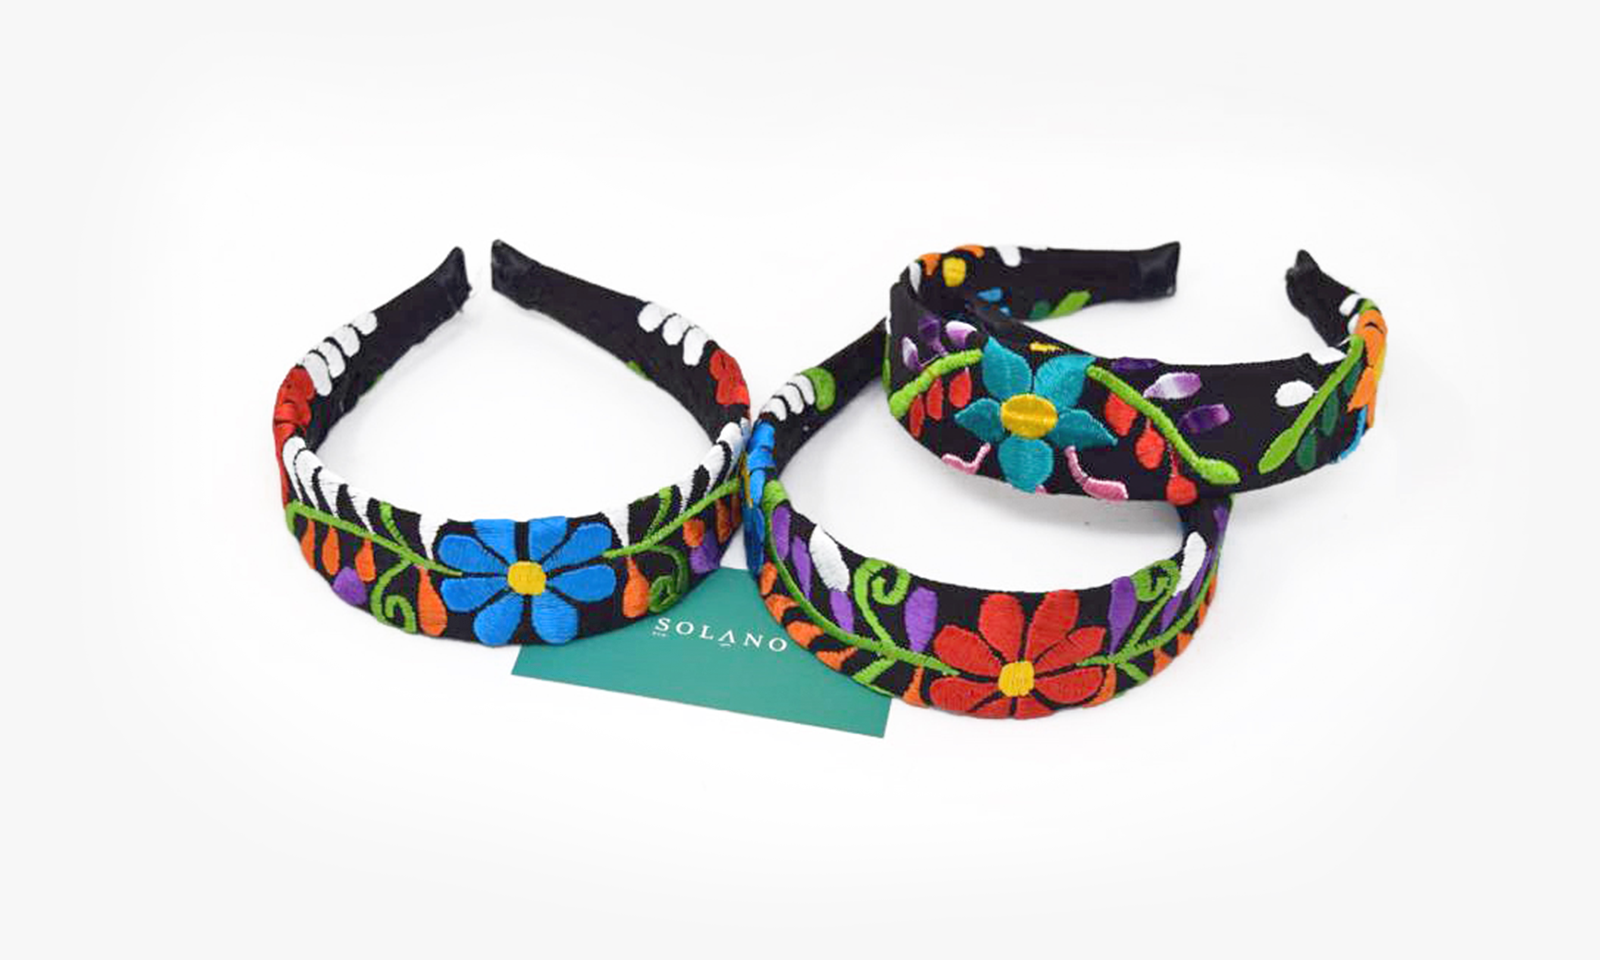 Mexican headband embroidery